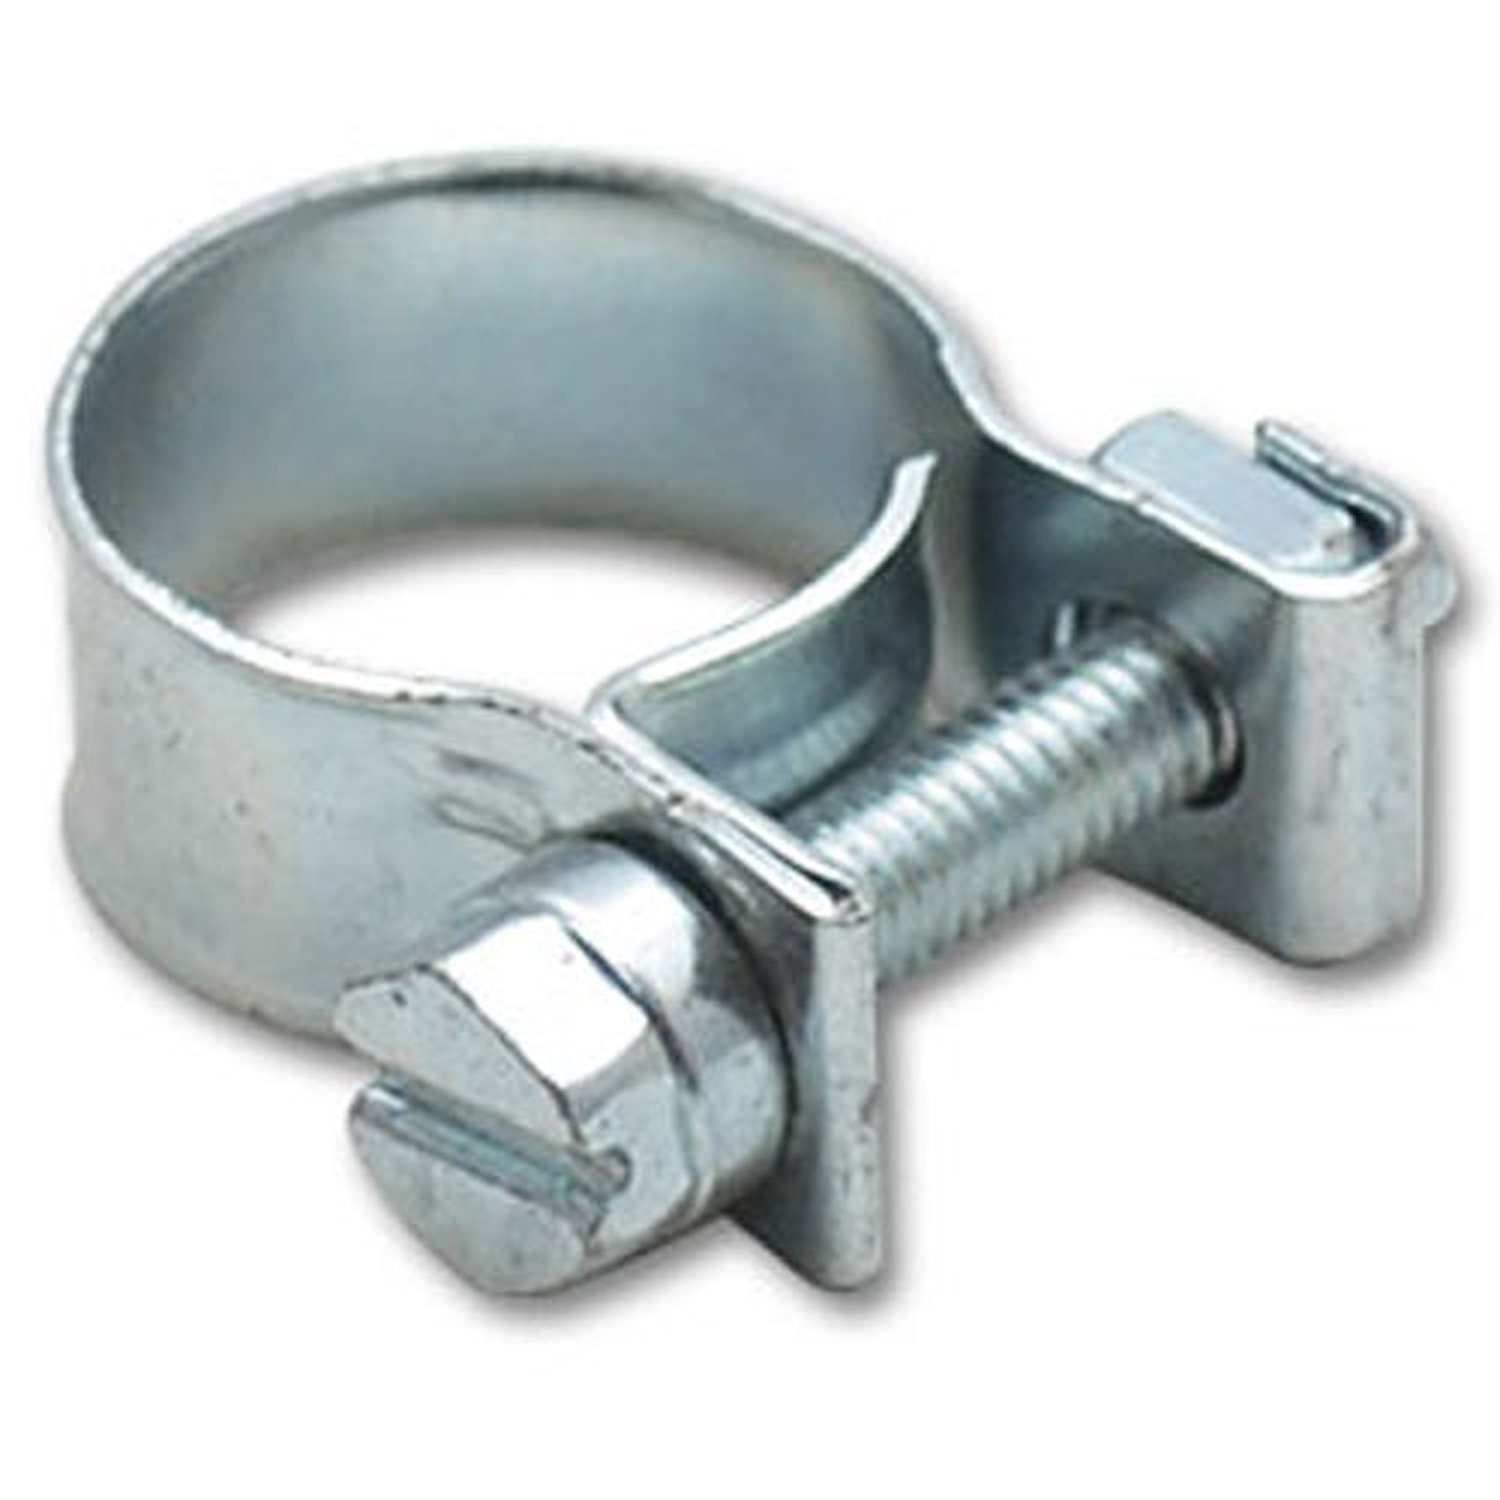 Fuel Injector Style Mini Hose Clamps 10mm - 12mm